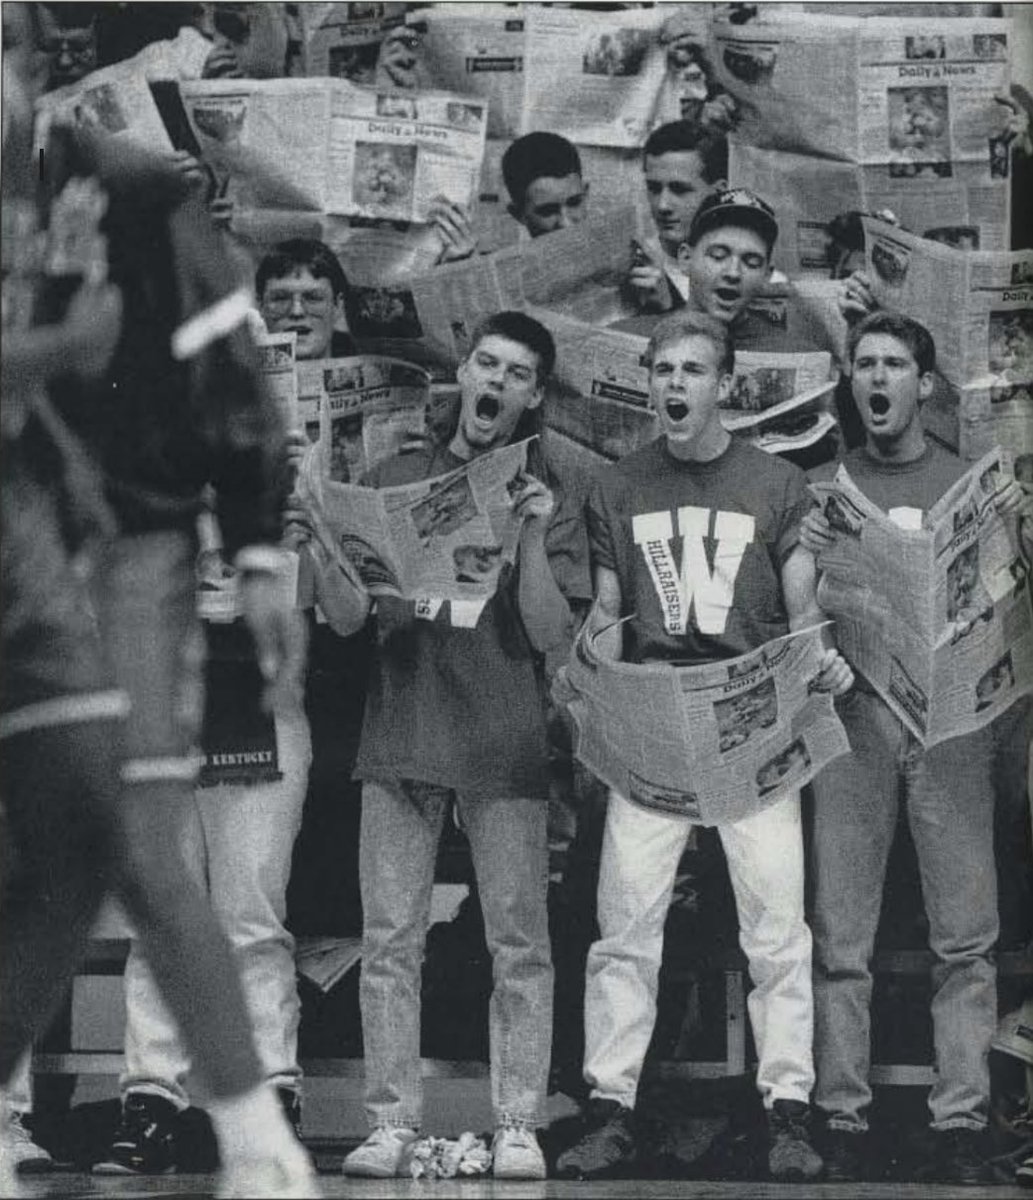 Summer is so close! Keep cheering on your friends to finish out strong. Just like these students cheering on our WKU basketball team pictured in the 1993 Talisman.